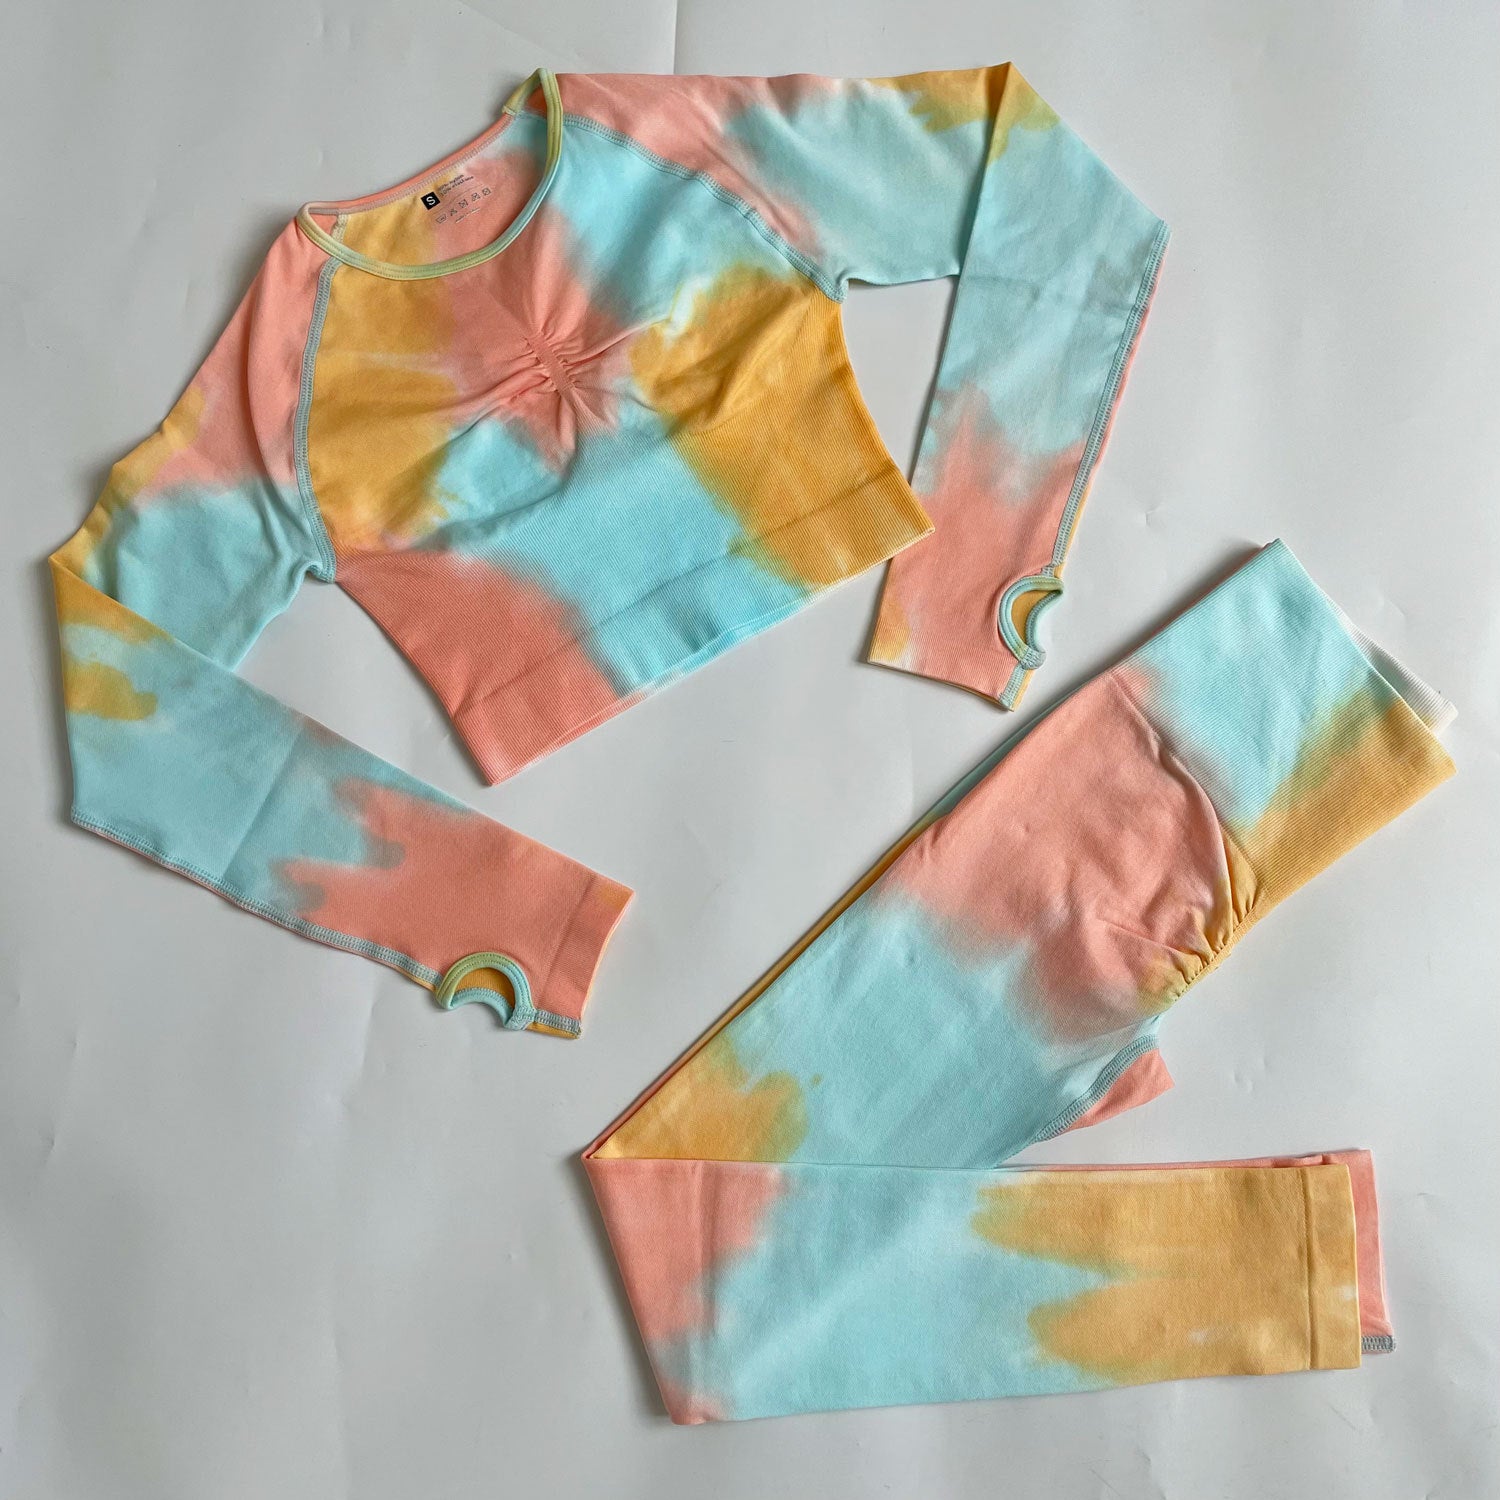 What is New Arrival Tie Dye Gradient Patterned Seamless Gym